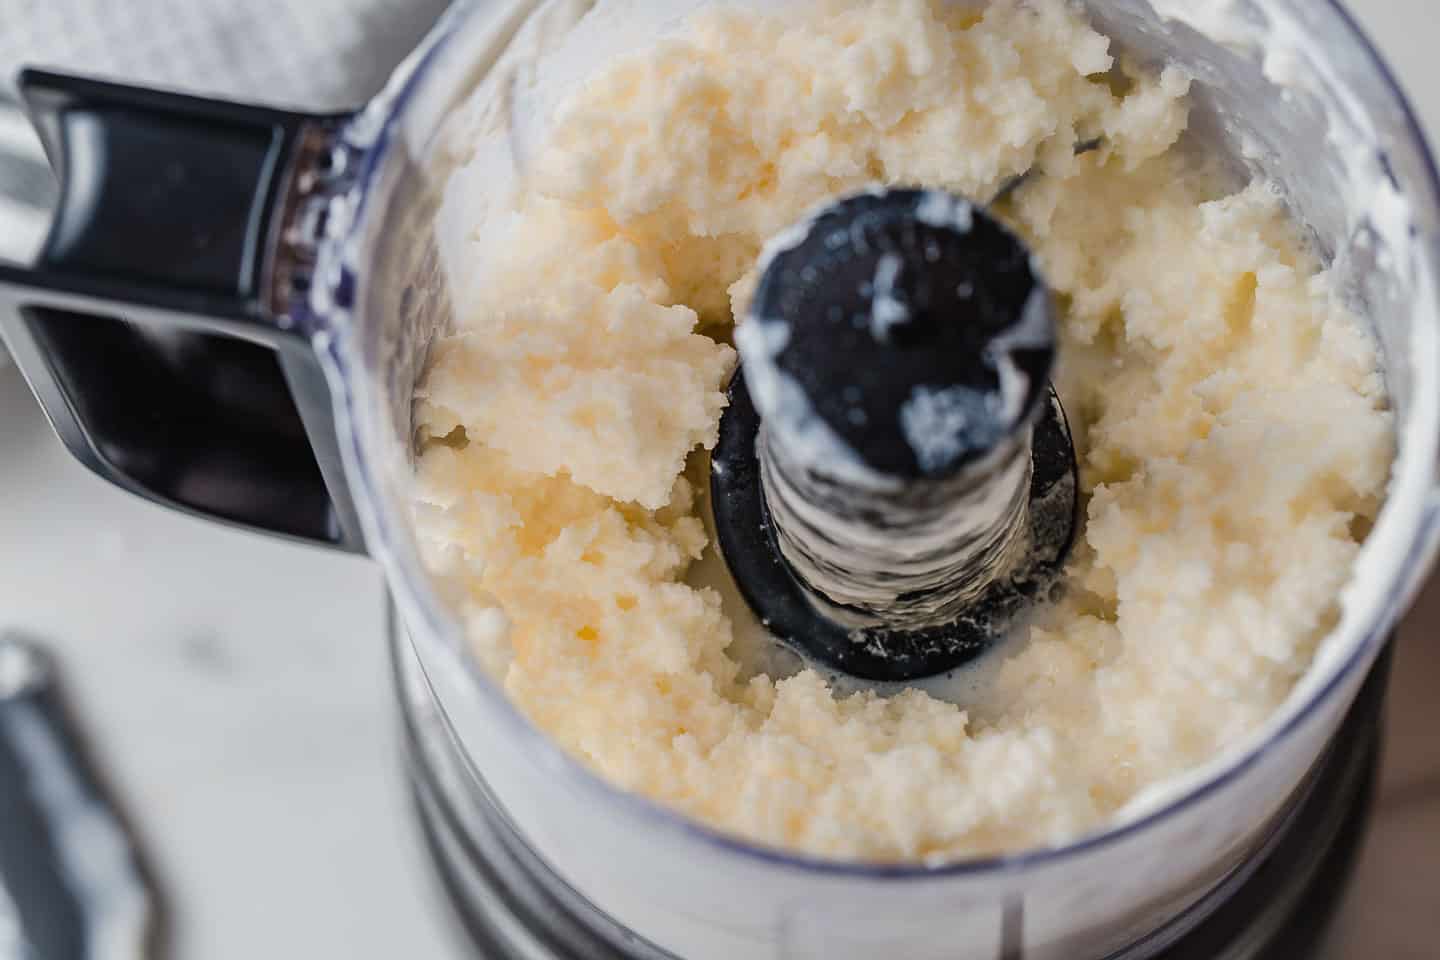 Homemade butter in a food processor.